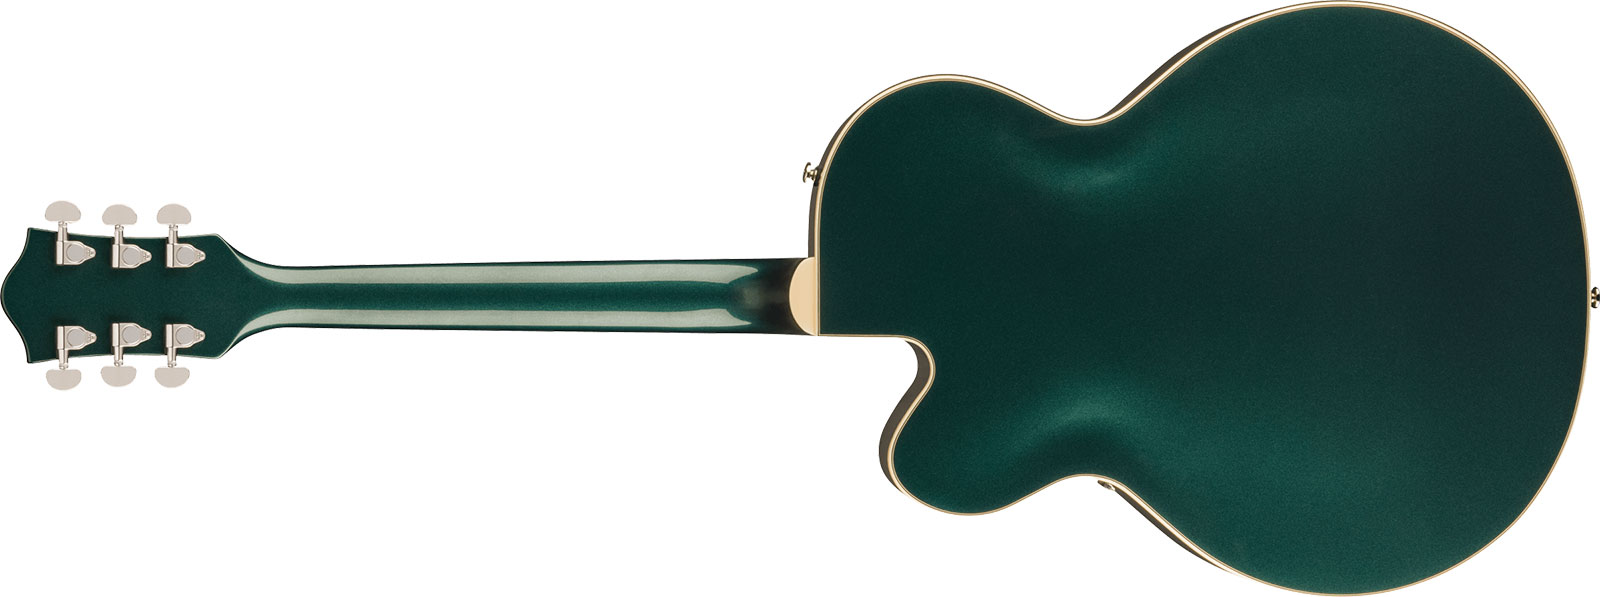 Gretsch G2420 Streamliner Hollow Body With Chromatic Ii 2h Ht Lau - Cadillac Green - Guitare Électrique 3/4 Caisse & Jazz - Variation 1